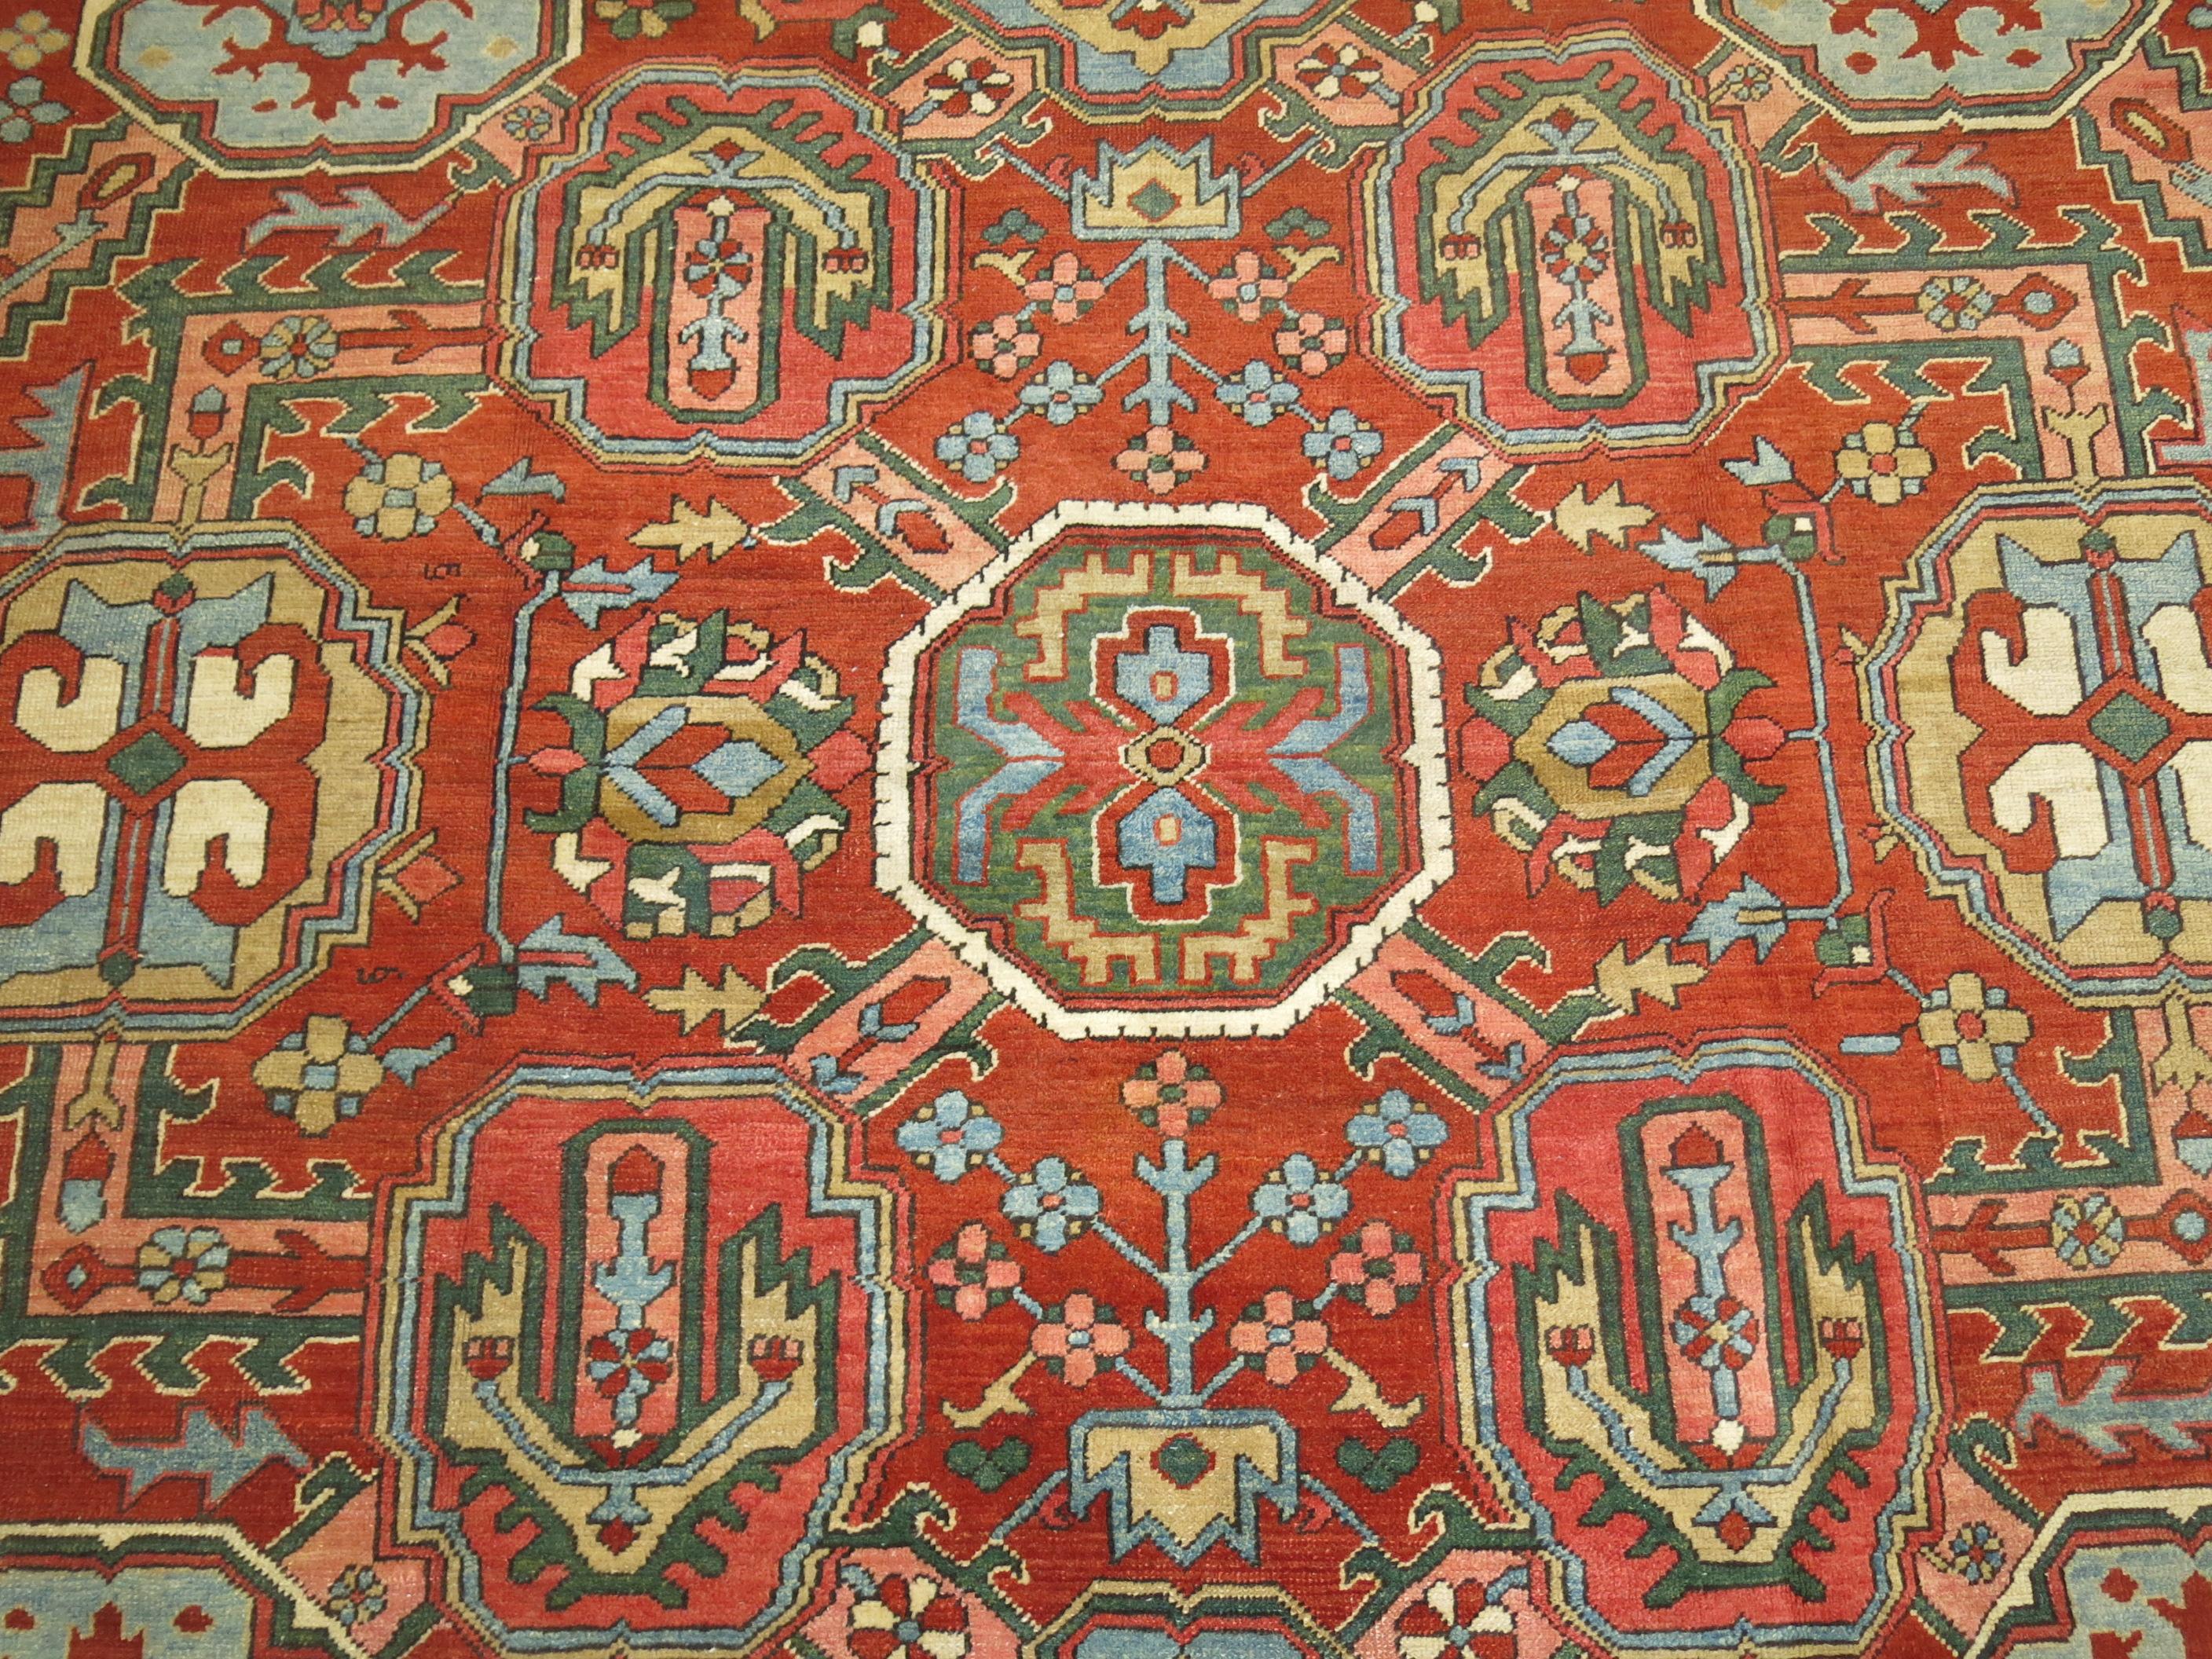 A room size Persian antique Persian Heriz rug. Brick red field, navy border. Dominant accents in olive green, light green, light blue, mustard, pink. Compelling all-over design.
Condition is excellent too. Even Pile throughout,

circa 1920,